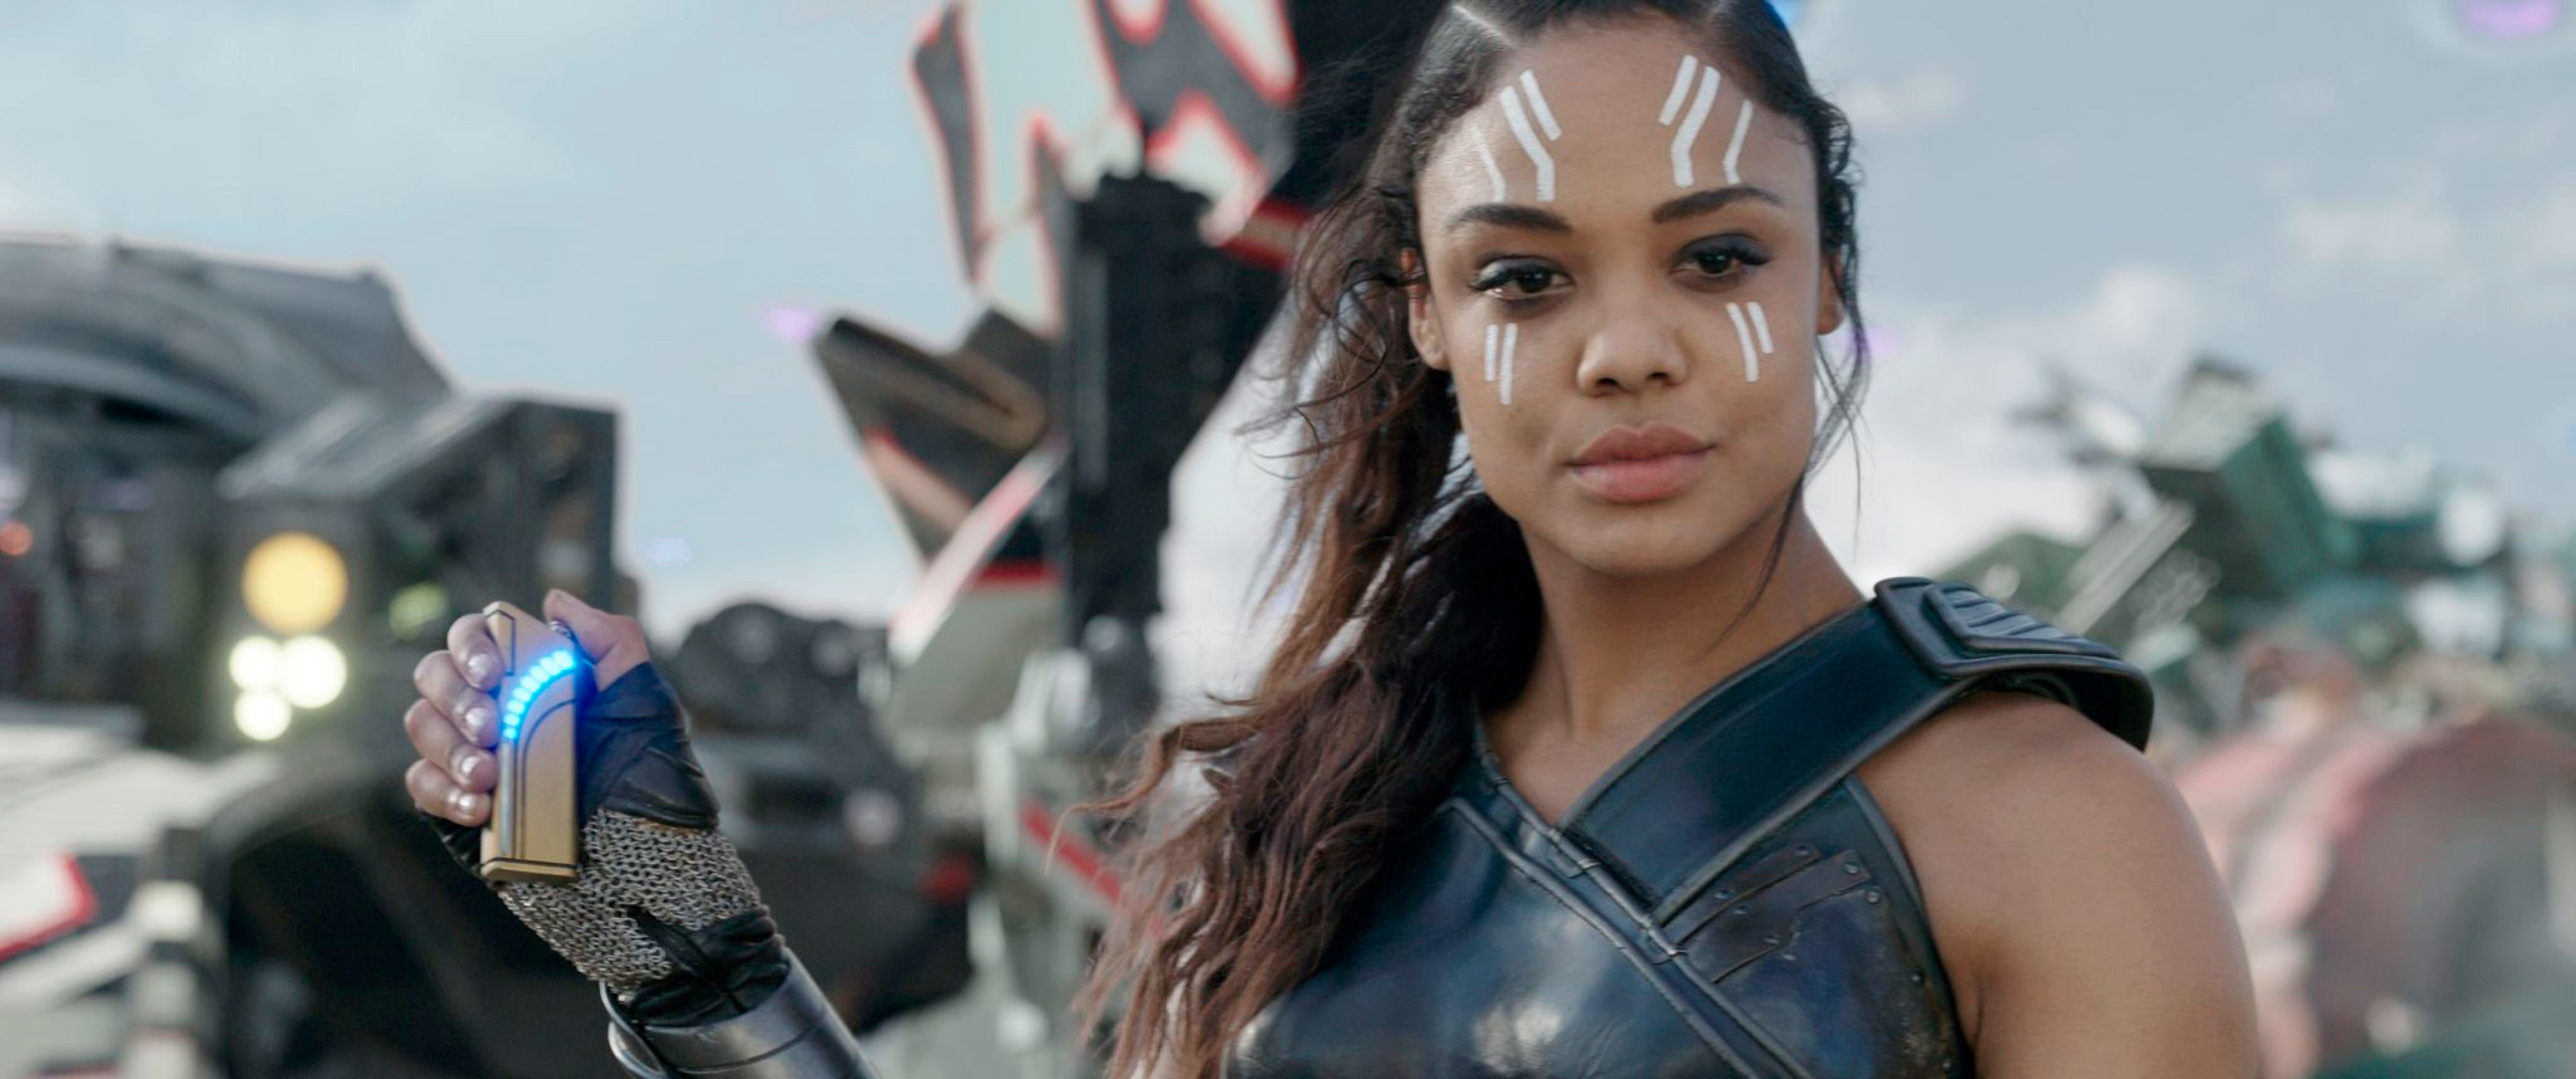 2017 thor ragnarok
for her marvel universe debut, thompson played a warrior named valkyrie